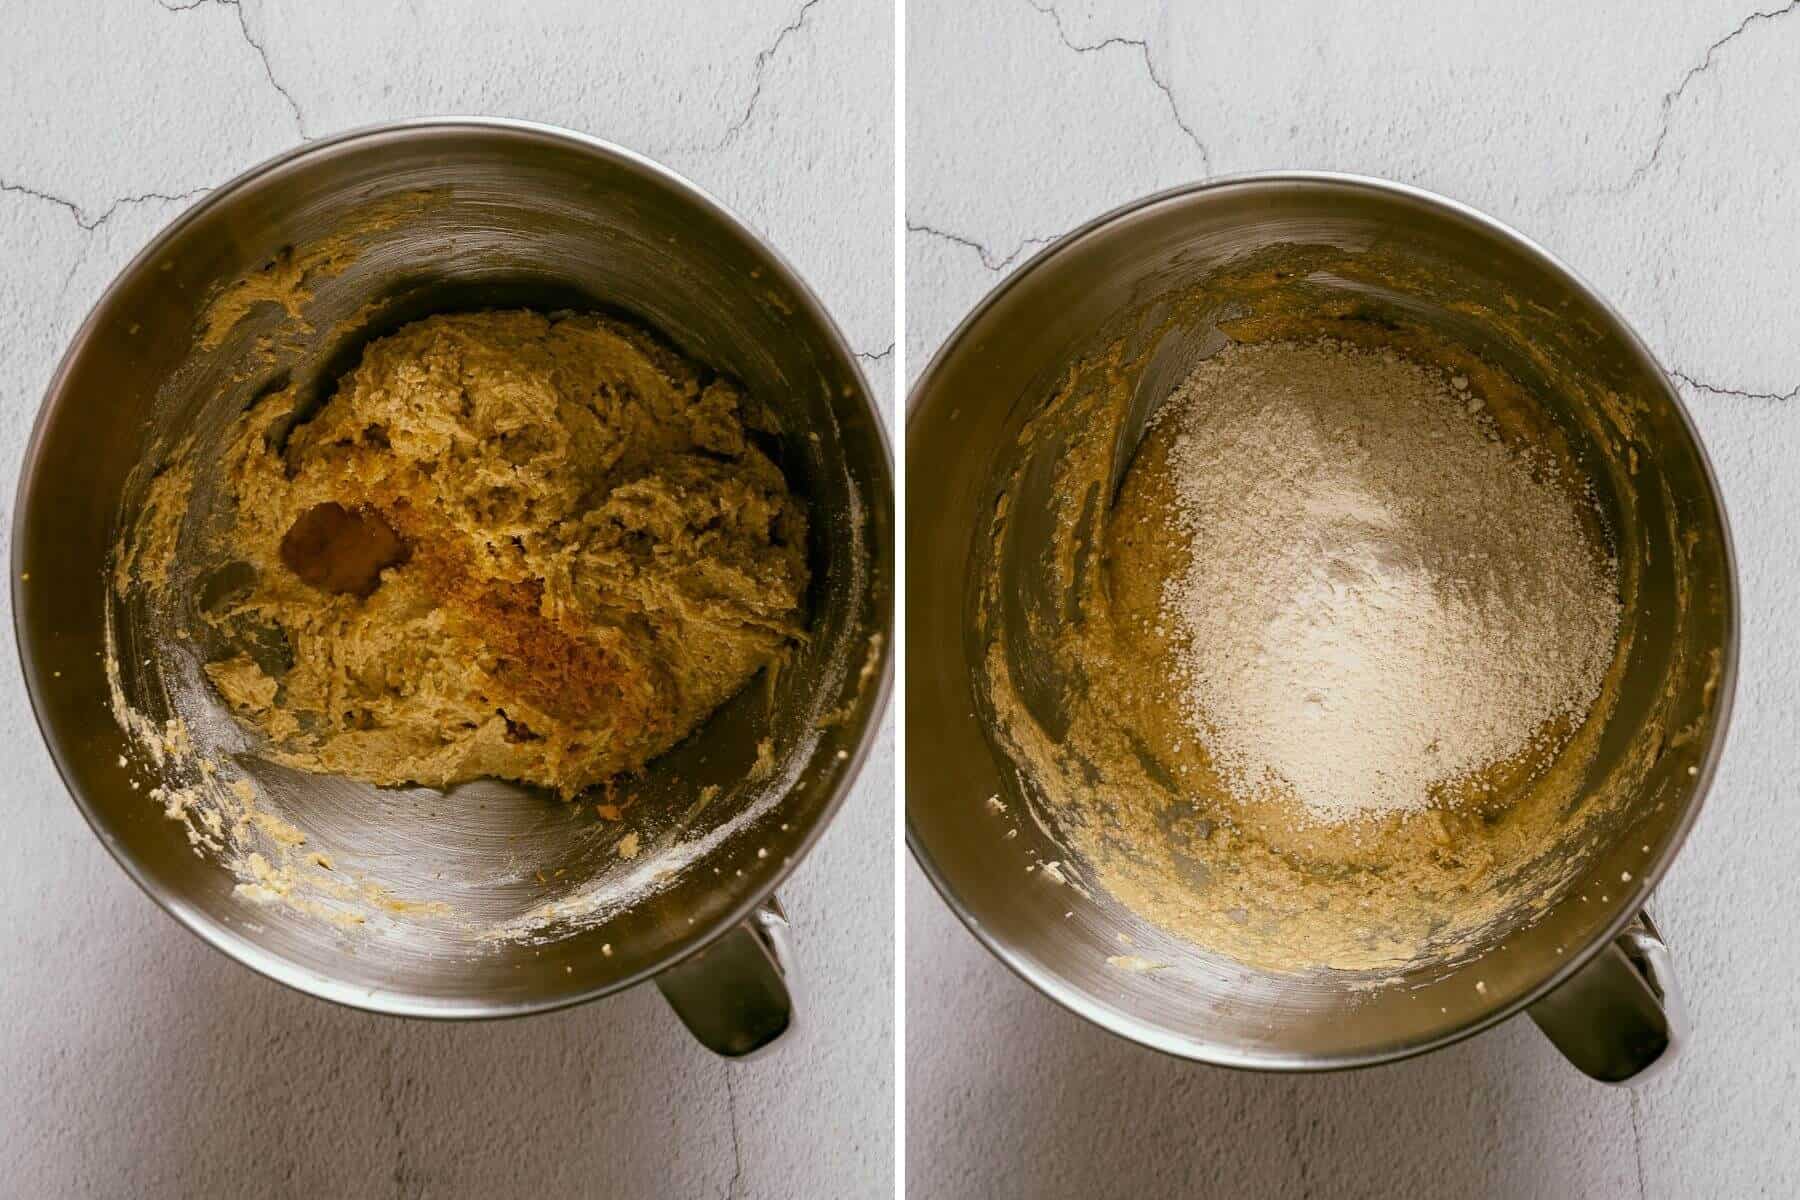 two side by side images of cake batter with zest and flour.